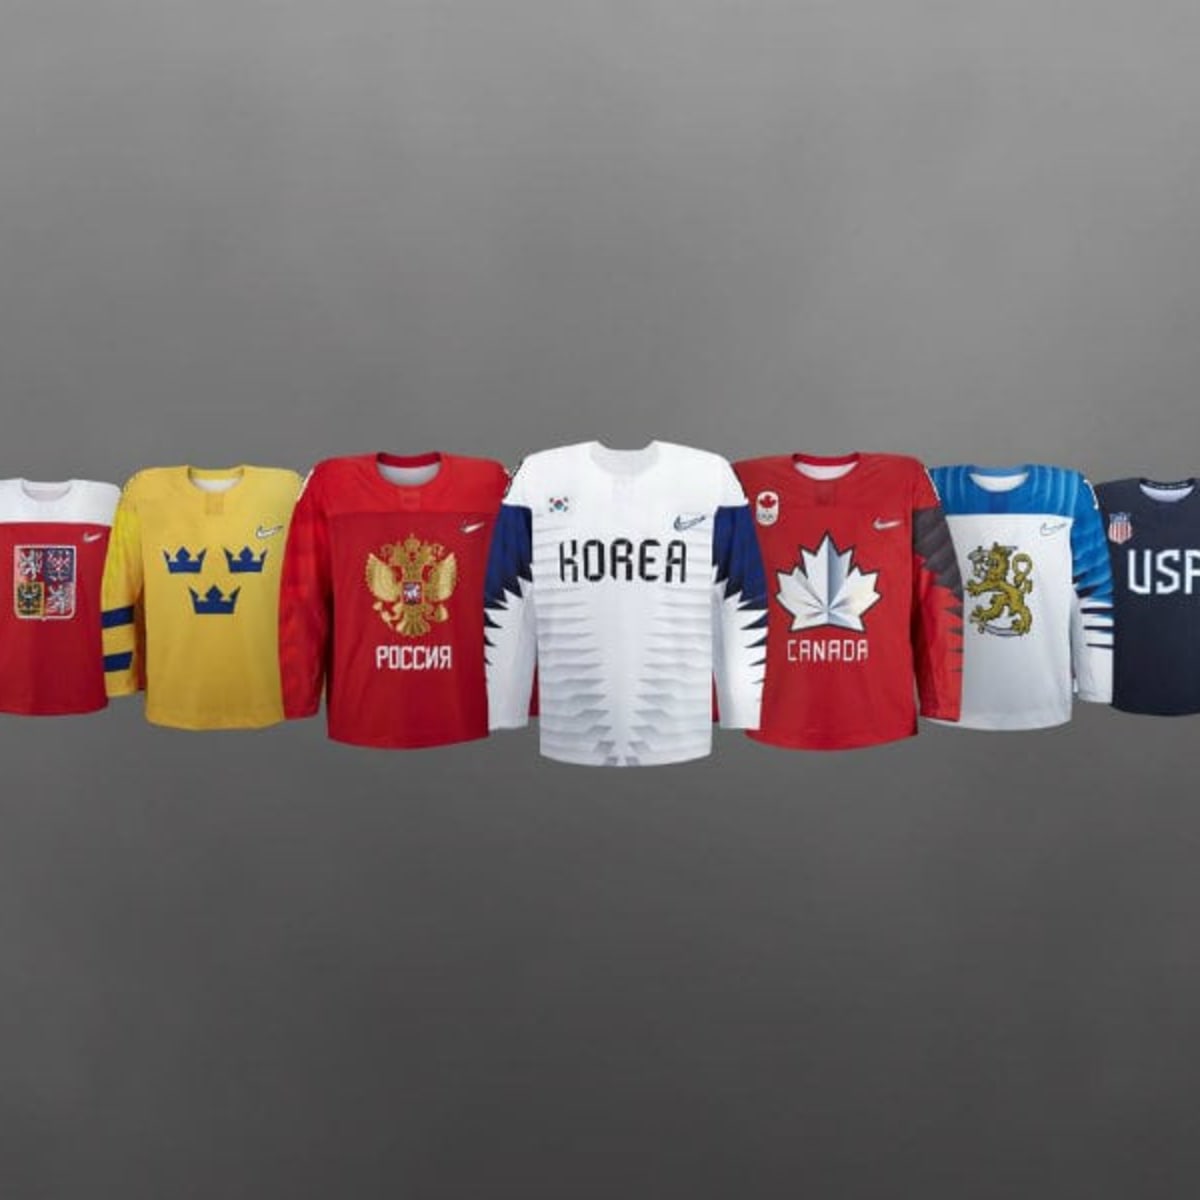 Russia unveils interesting new Olympic Hockey jerseys for Sochi 